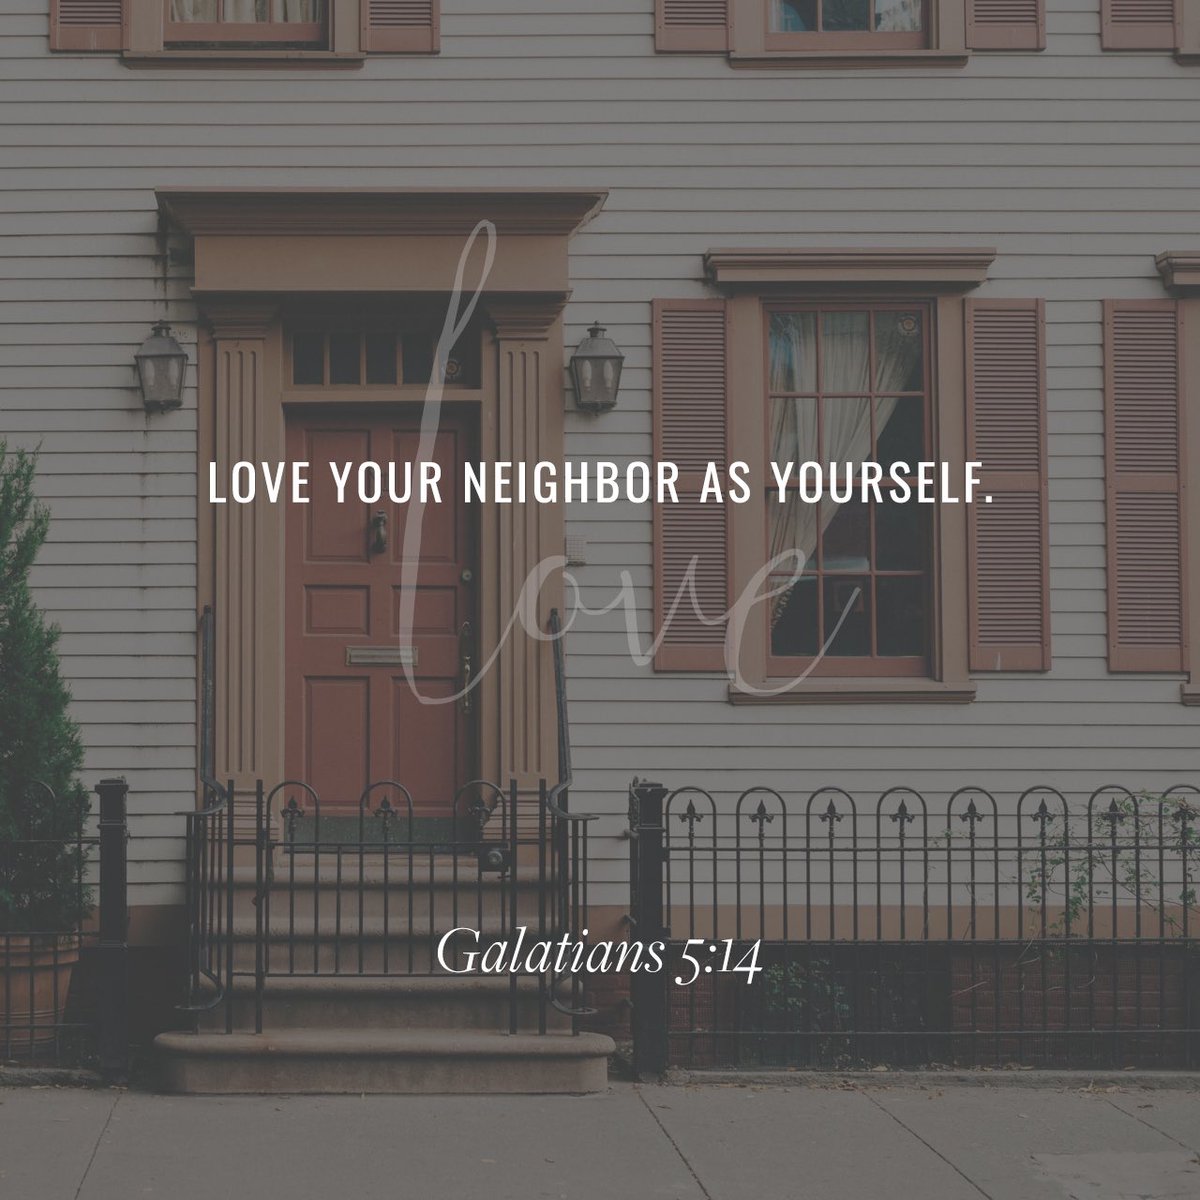 Who is your neighbor you ask?  Well, everyone you come in contact with!!! I love you ALL my Twitter neighbors ❤️❤️❤️ #goshowsomelove #Jesusdidit #soshouldwe  bible.com/1/gal.5.14.kjv